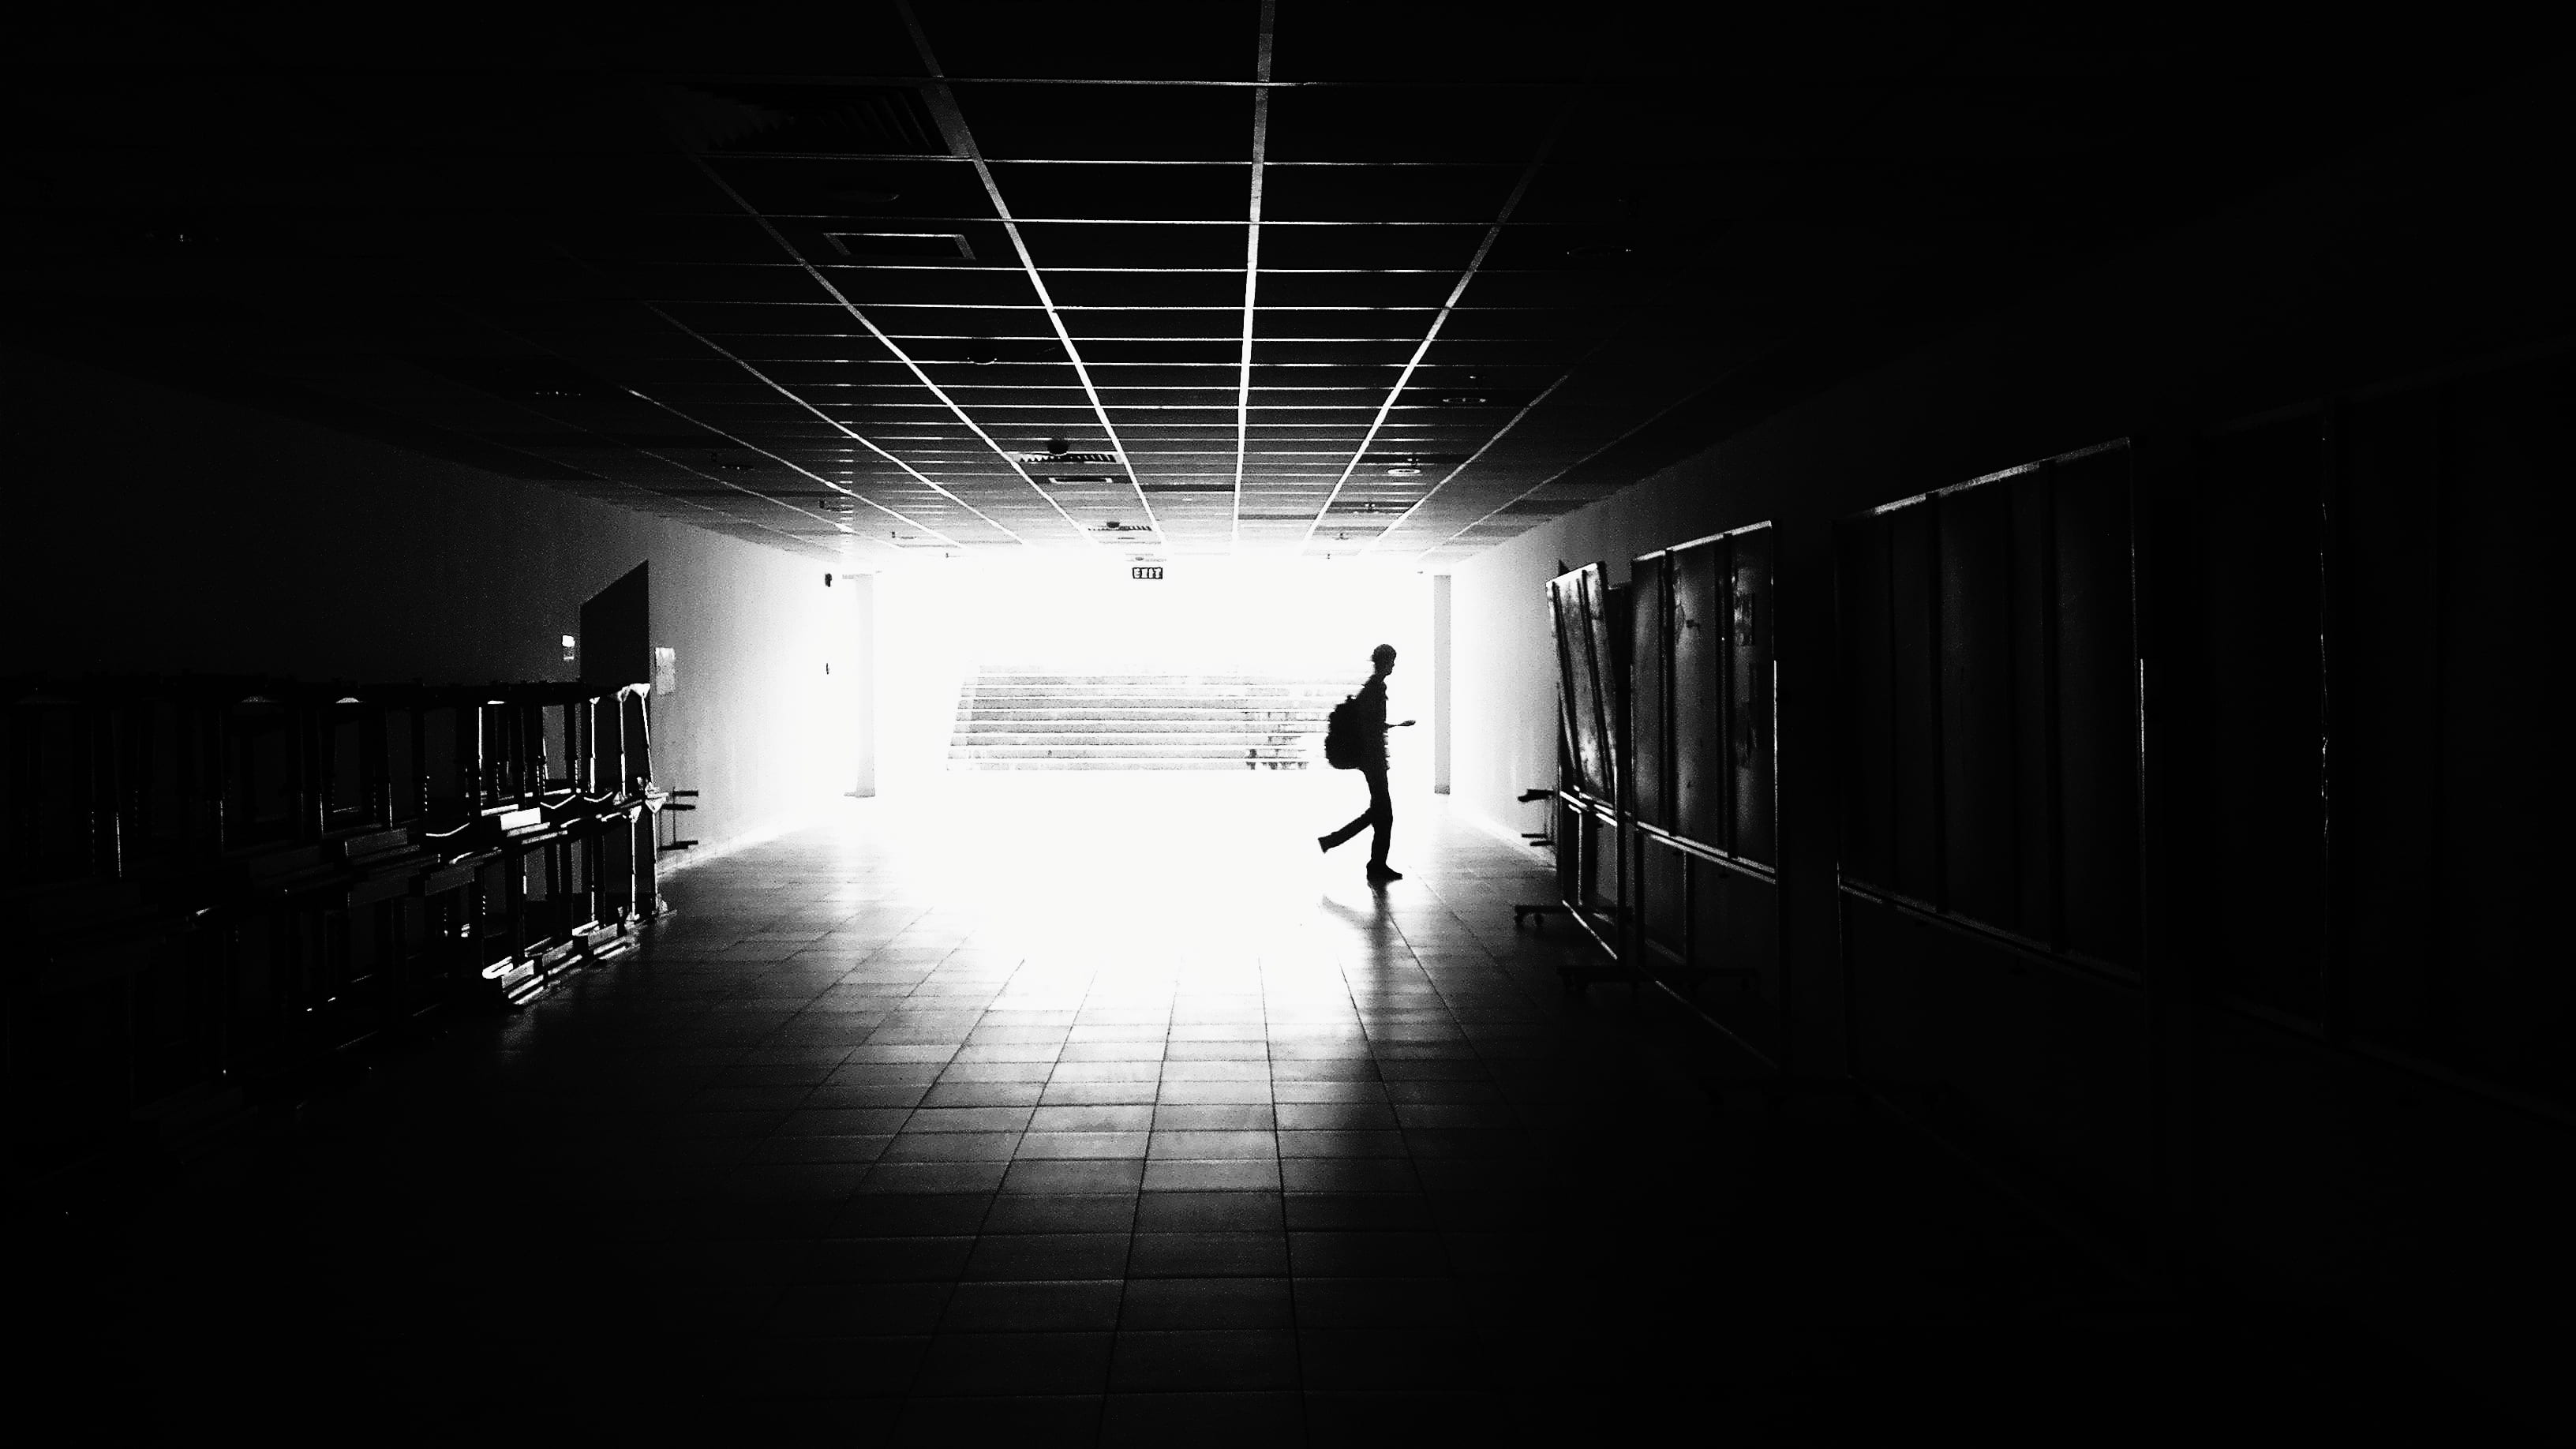 Silhouette of Man Walking on Hall, architecture, black-and-white